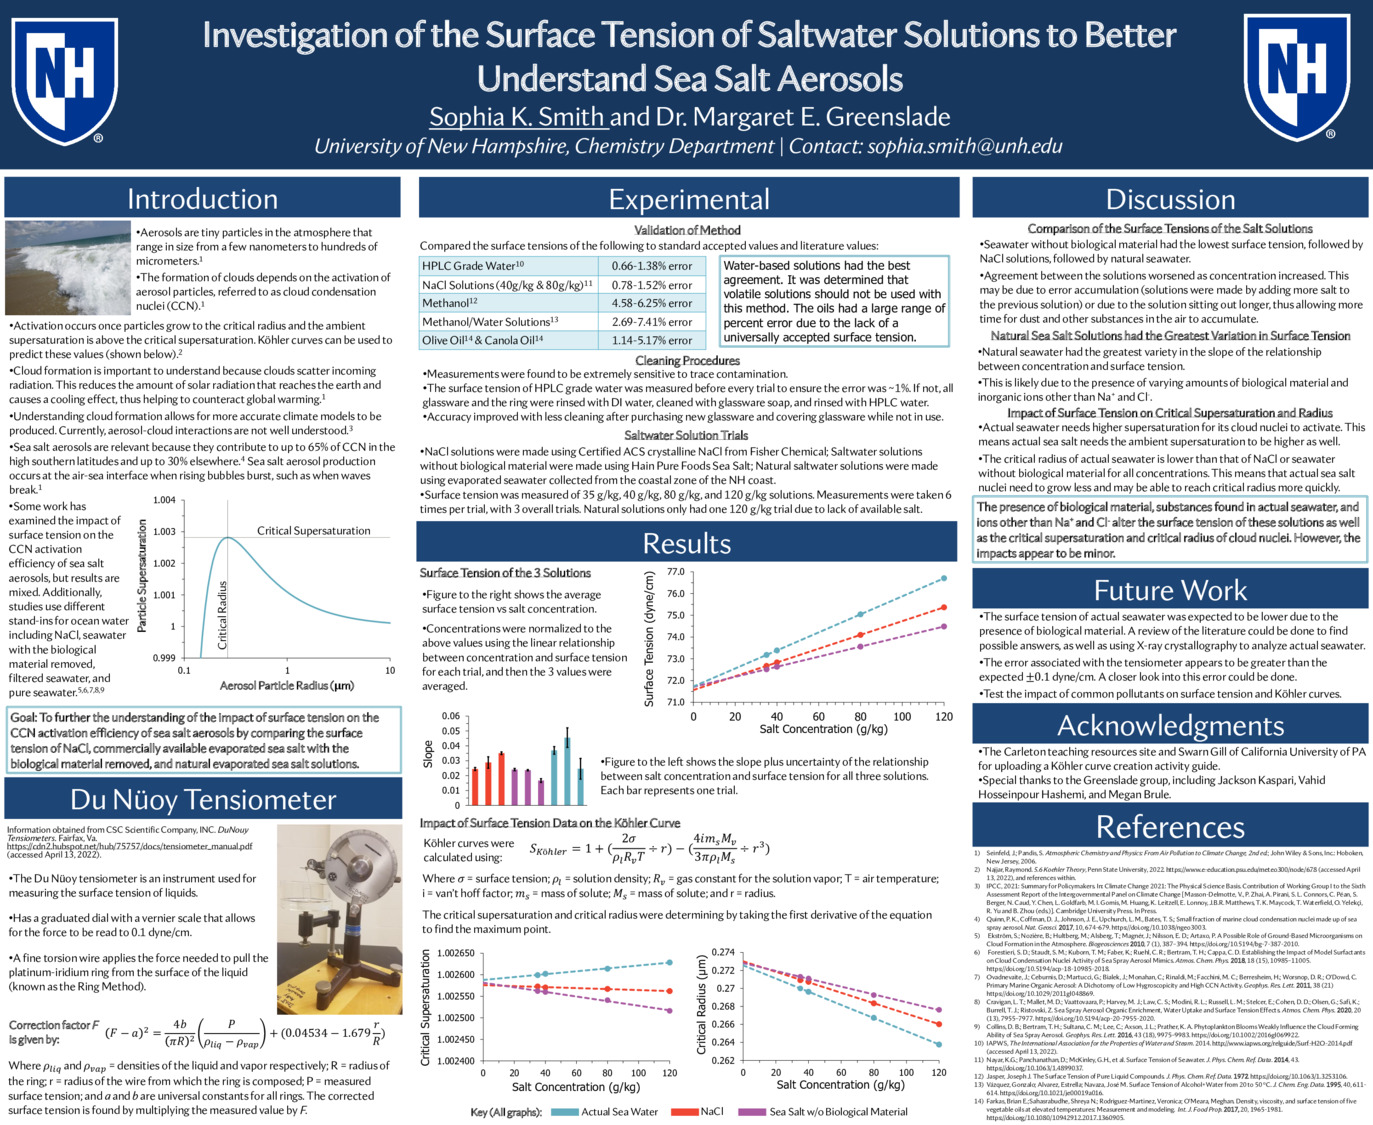 Investigation Of The Surface Tension Of Saltwater Solutions To Better Understand Sea Salt Aerosols by sks1030